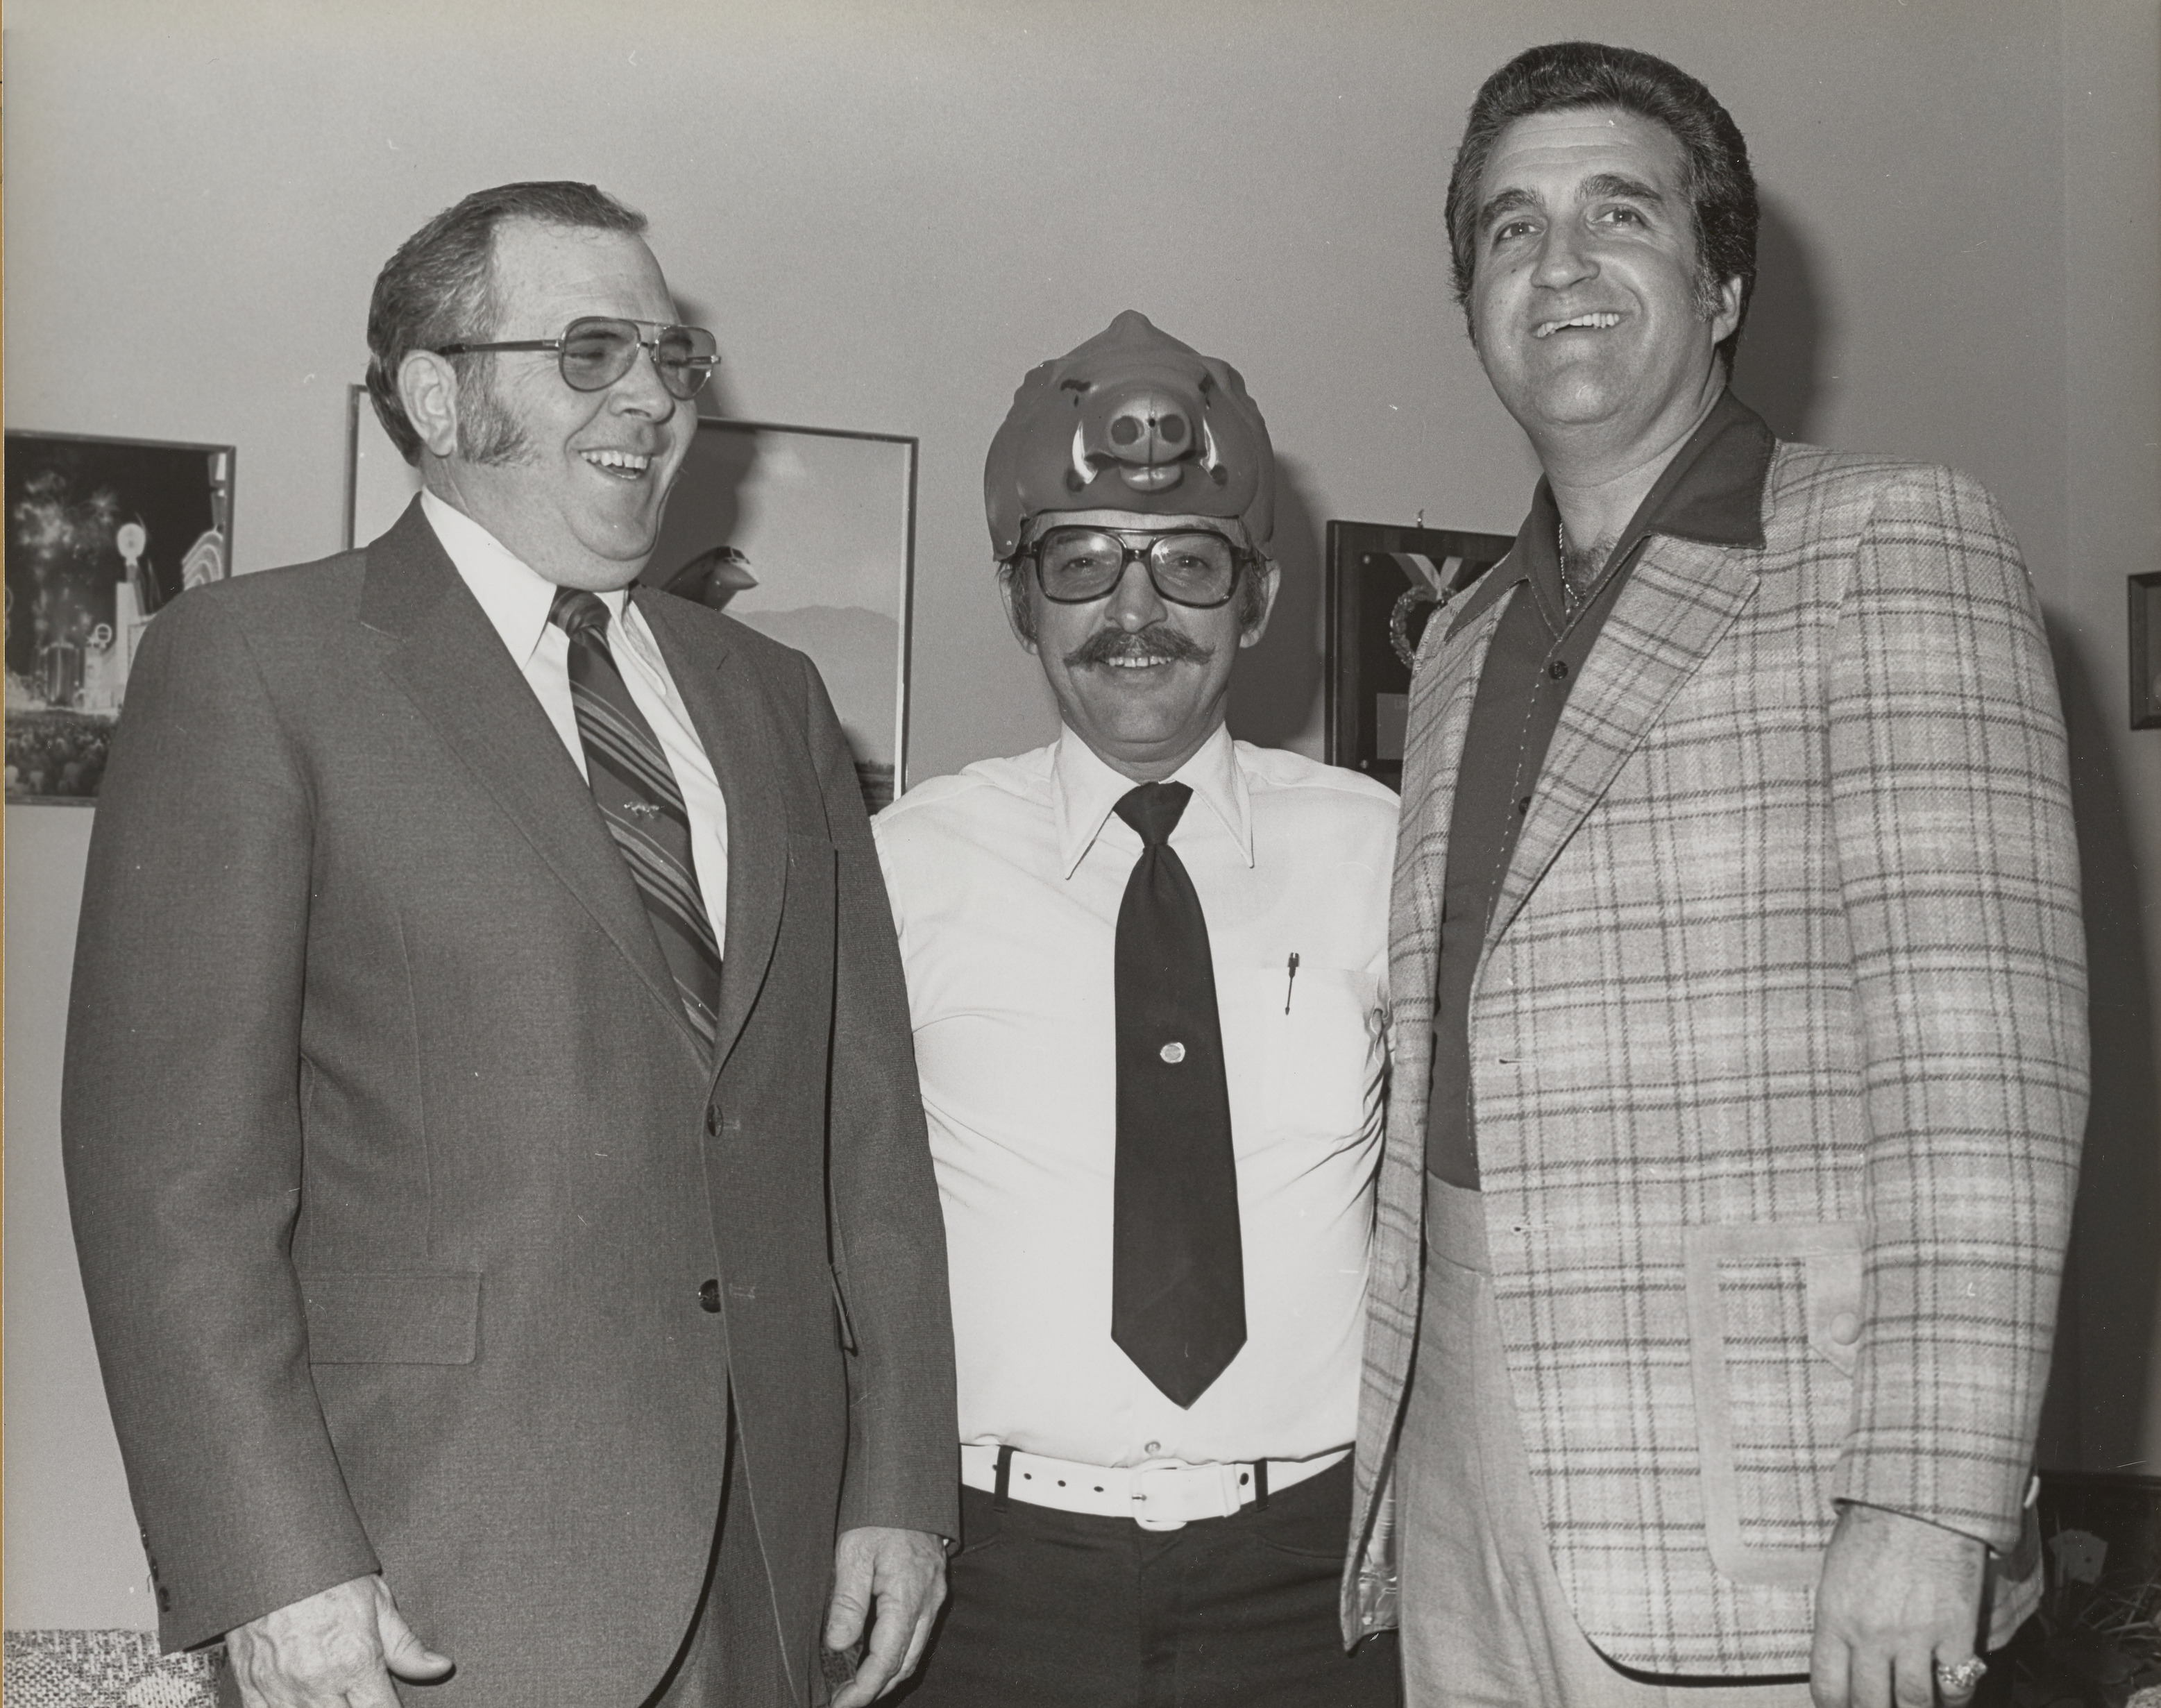 Photograph of Ron Lurie with a man wearing a pig hat and another unidentified man